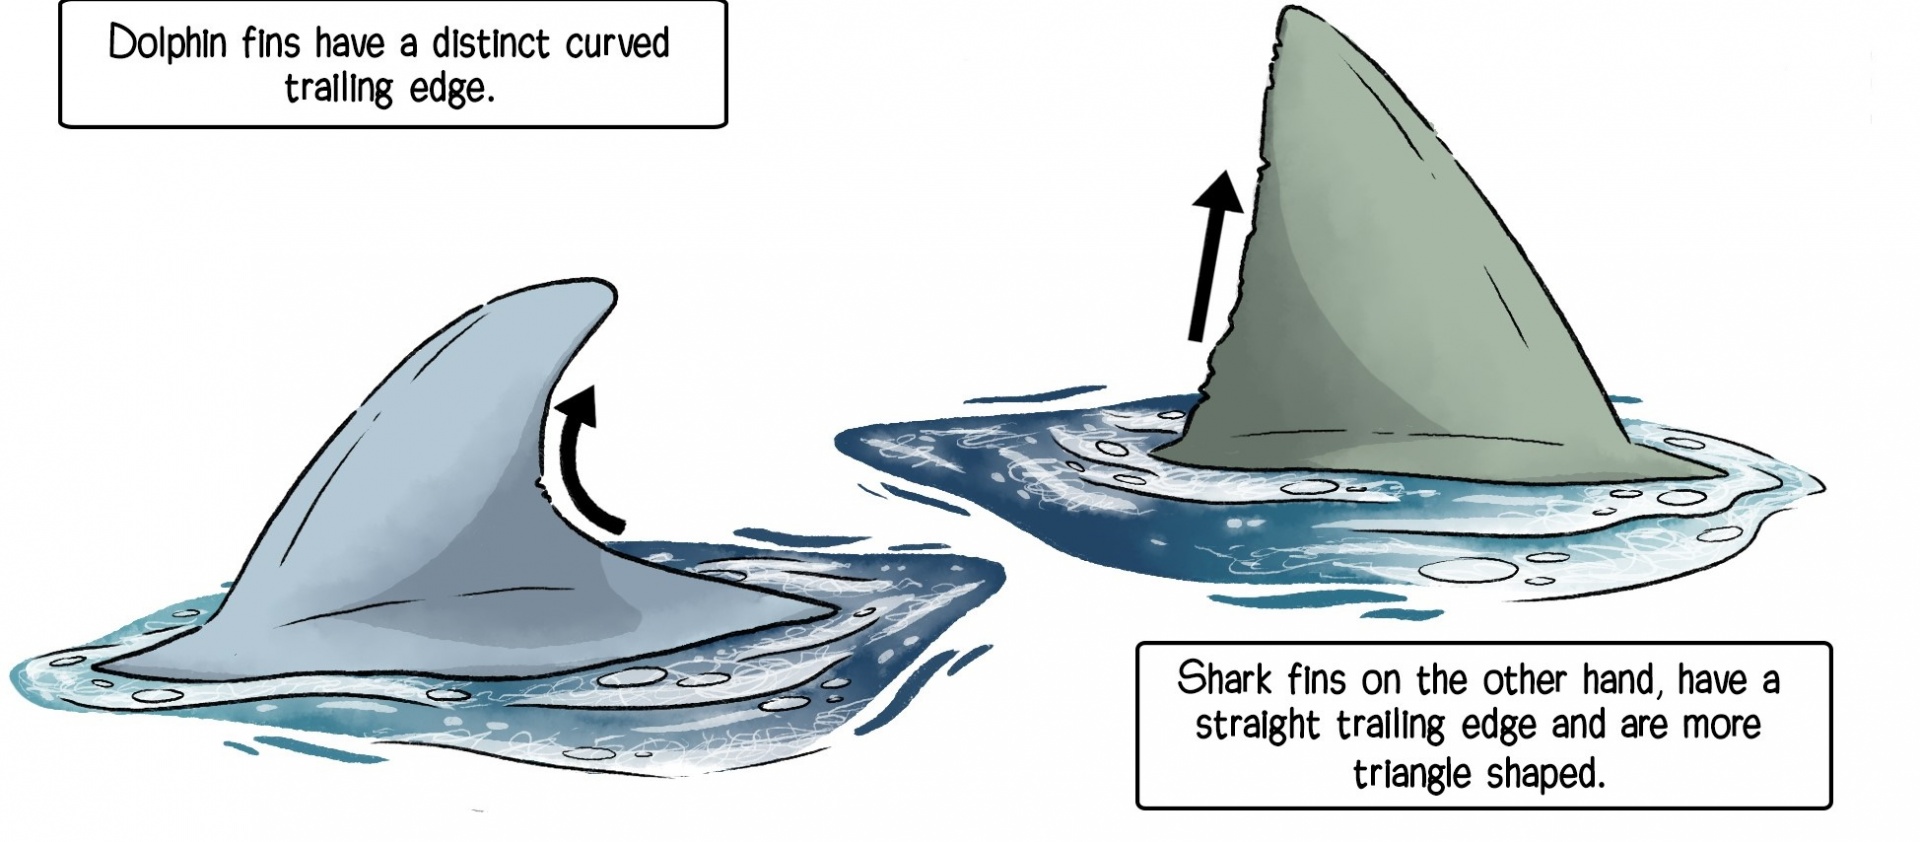 the curved trailing edge of a dolphin fin and the straight a